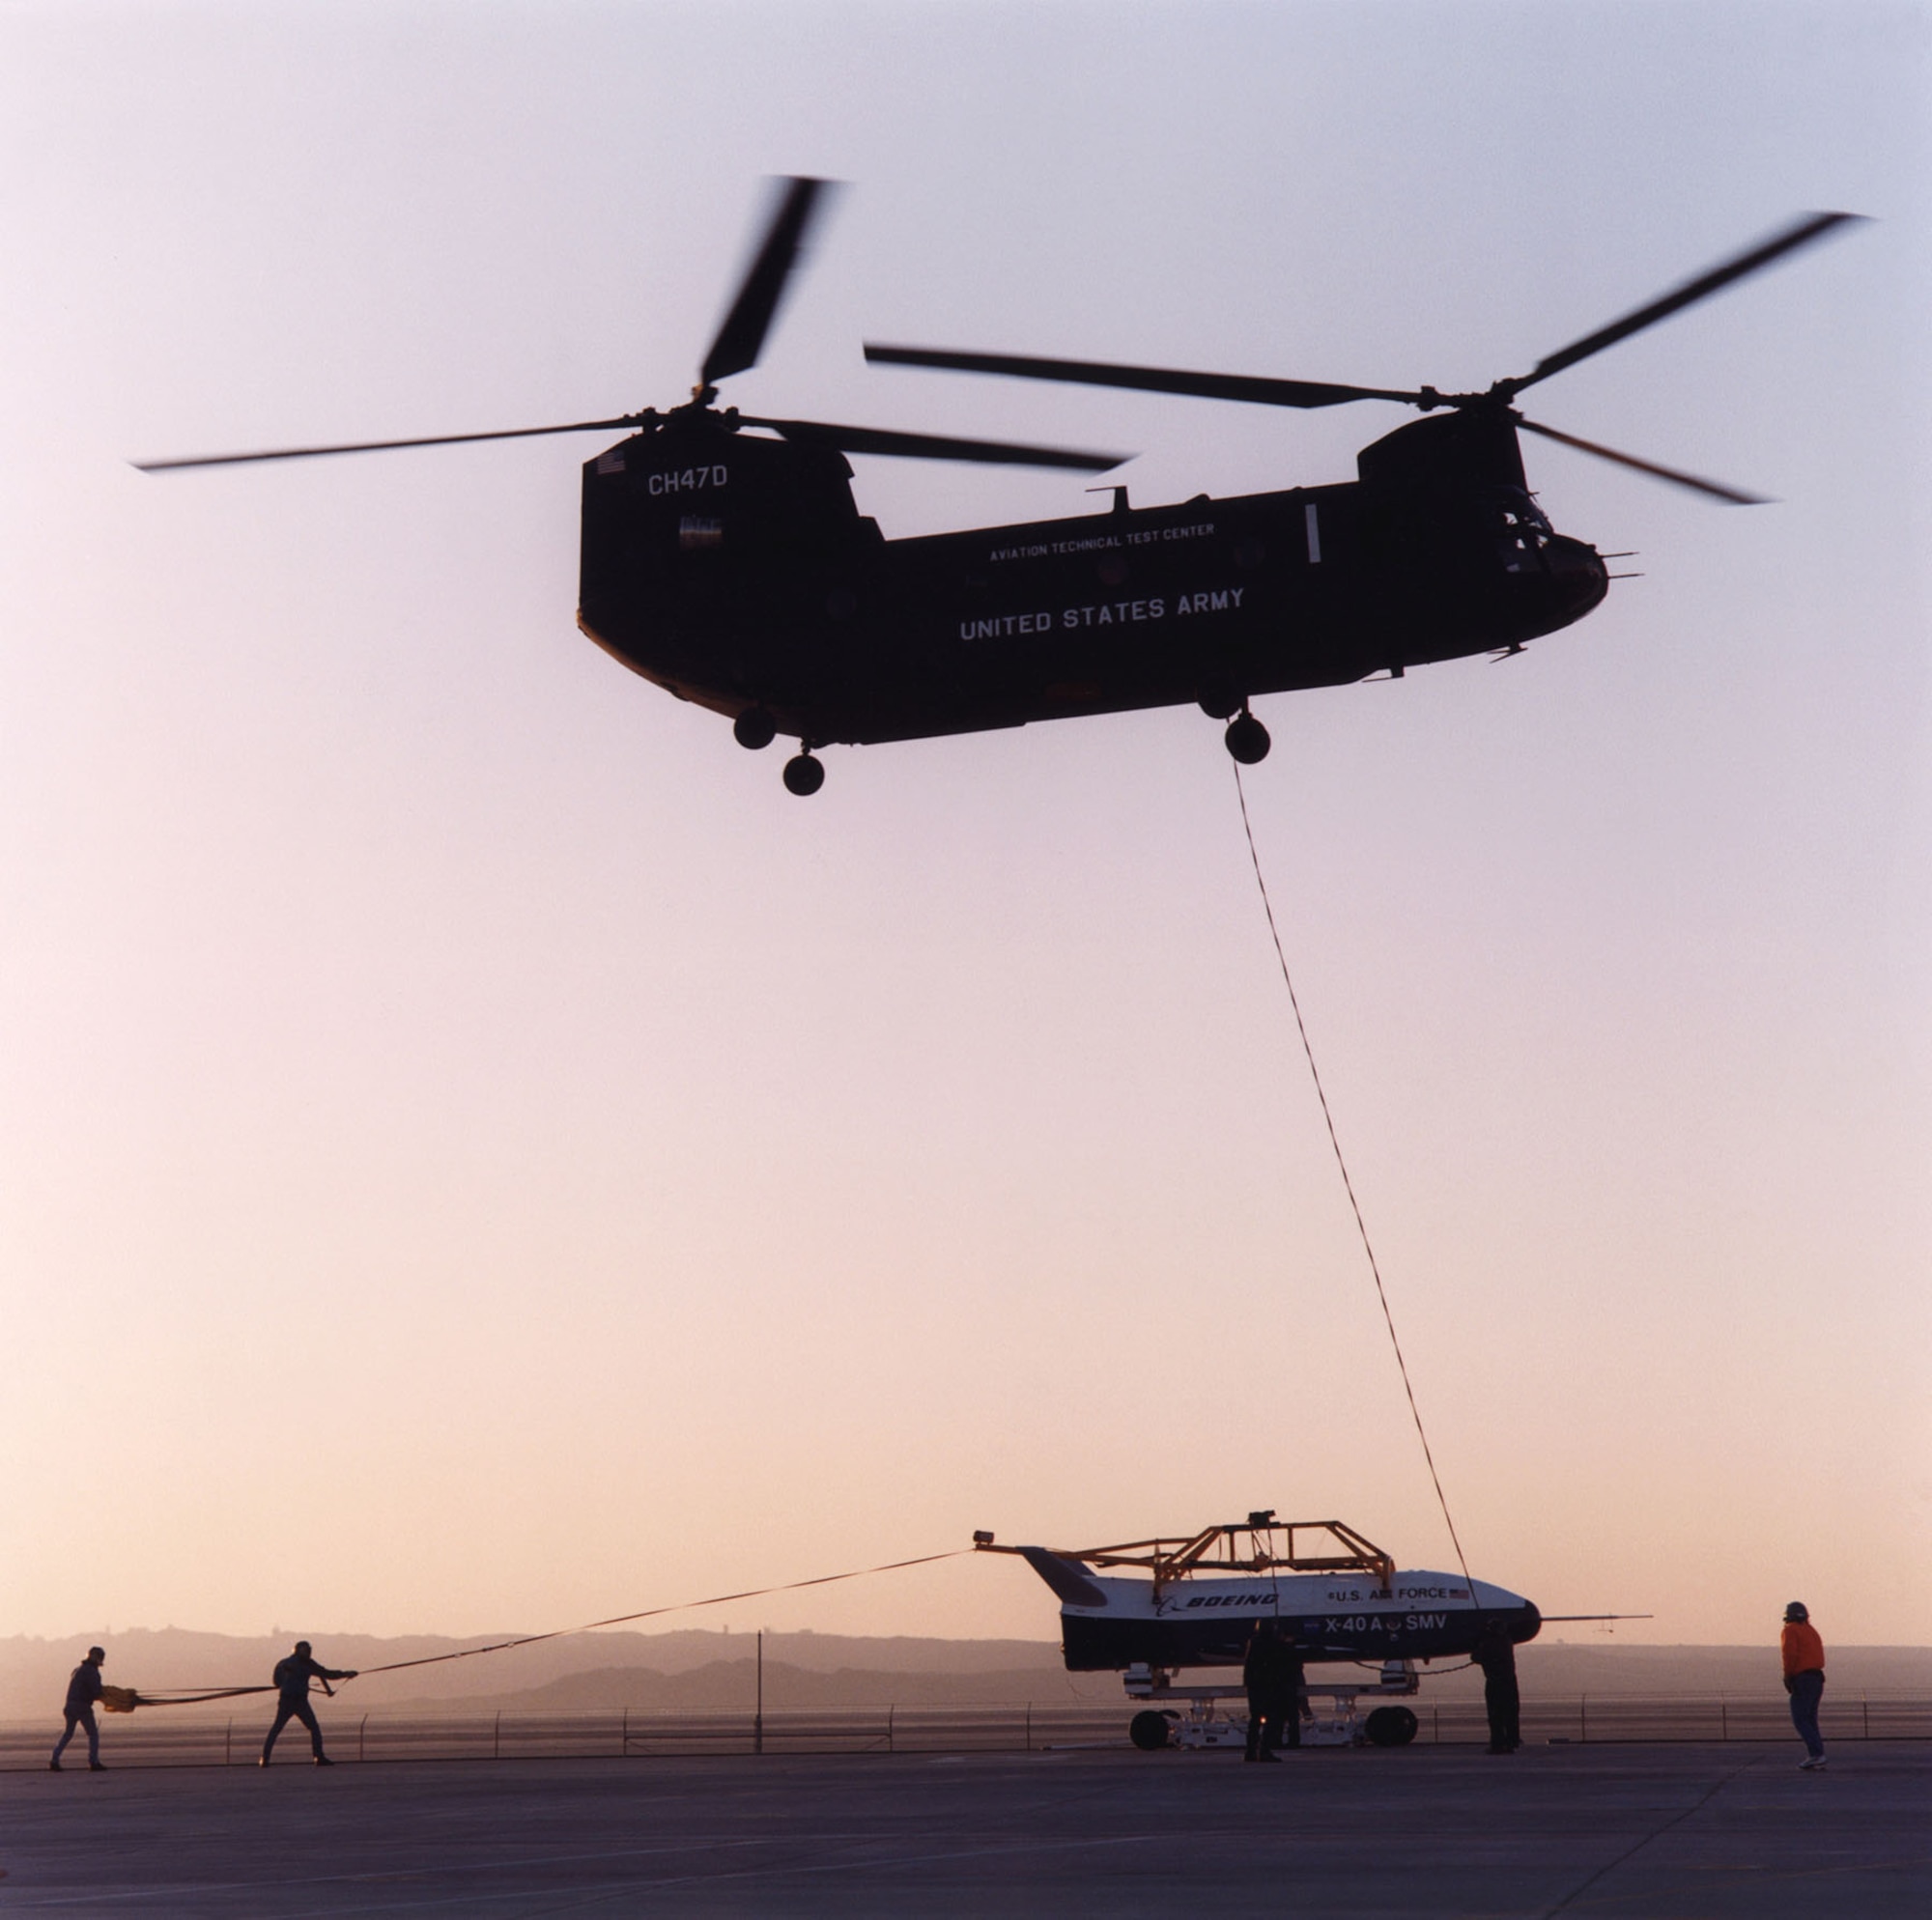 Boeing X-40A being lifted by a CH-47 helicopter for a free-fall test. Note the two support personnel holding the drag parachute behind the aircraft. Used to stabilize the X-40A while being lifted, the parachute was released just before the aircraft was released. (Photo courtesy of NASA)